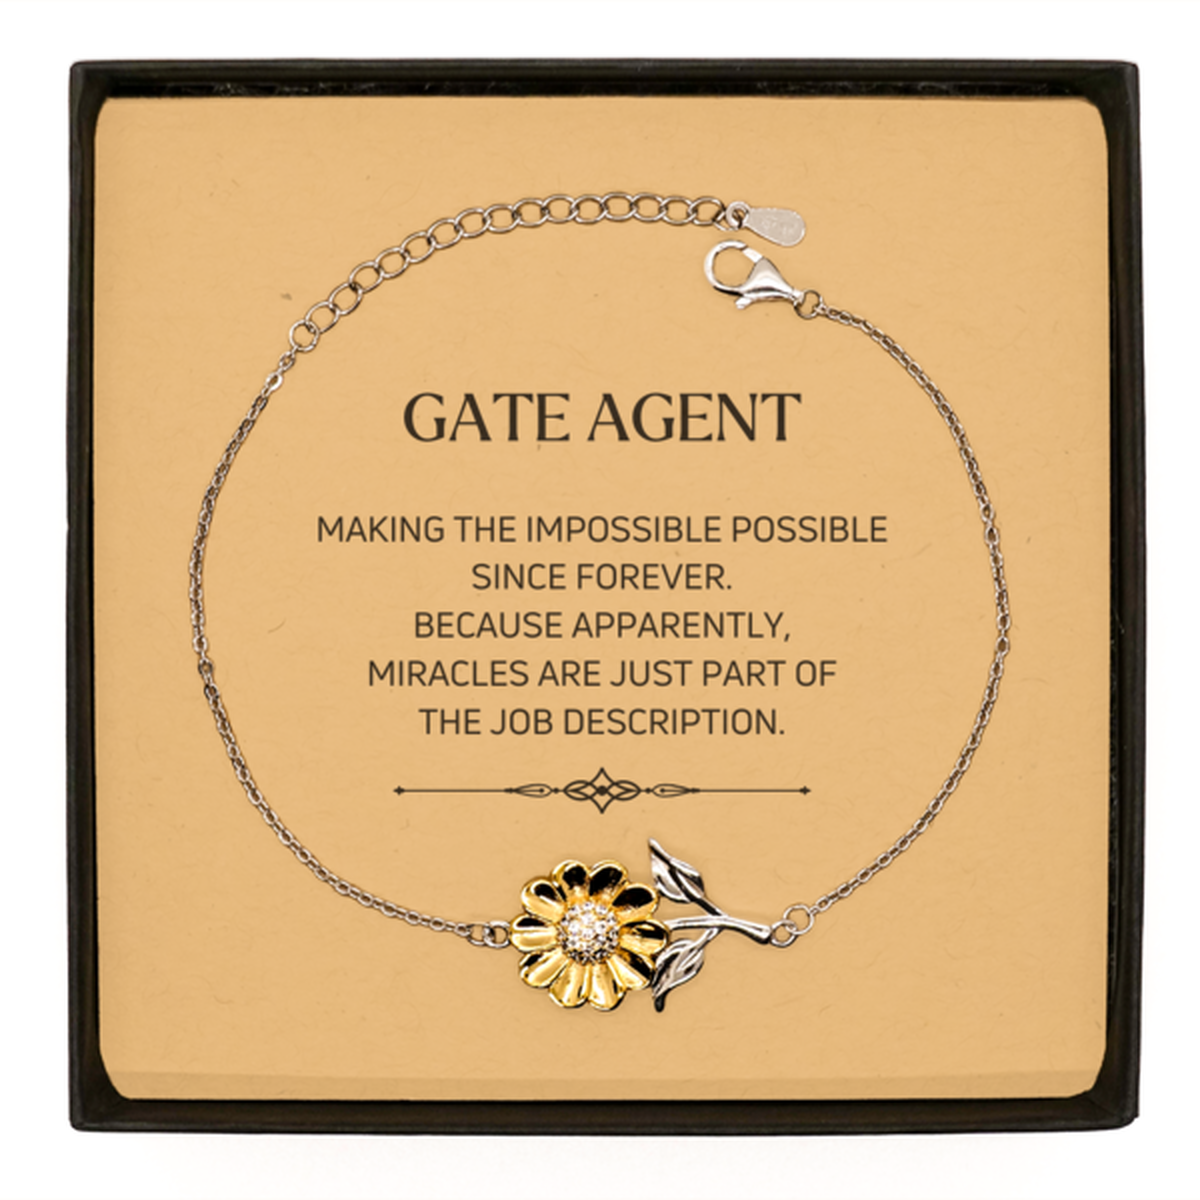 Funny Gate Agent Gifts, Miracles are just part of the job description, Inspirational Birthday Sunflower Bracelet For Gate Agent, Men, Women, Coworkers, Friends, Boss